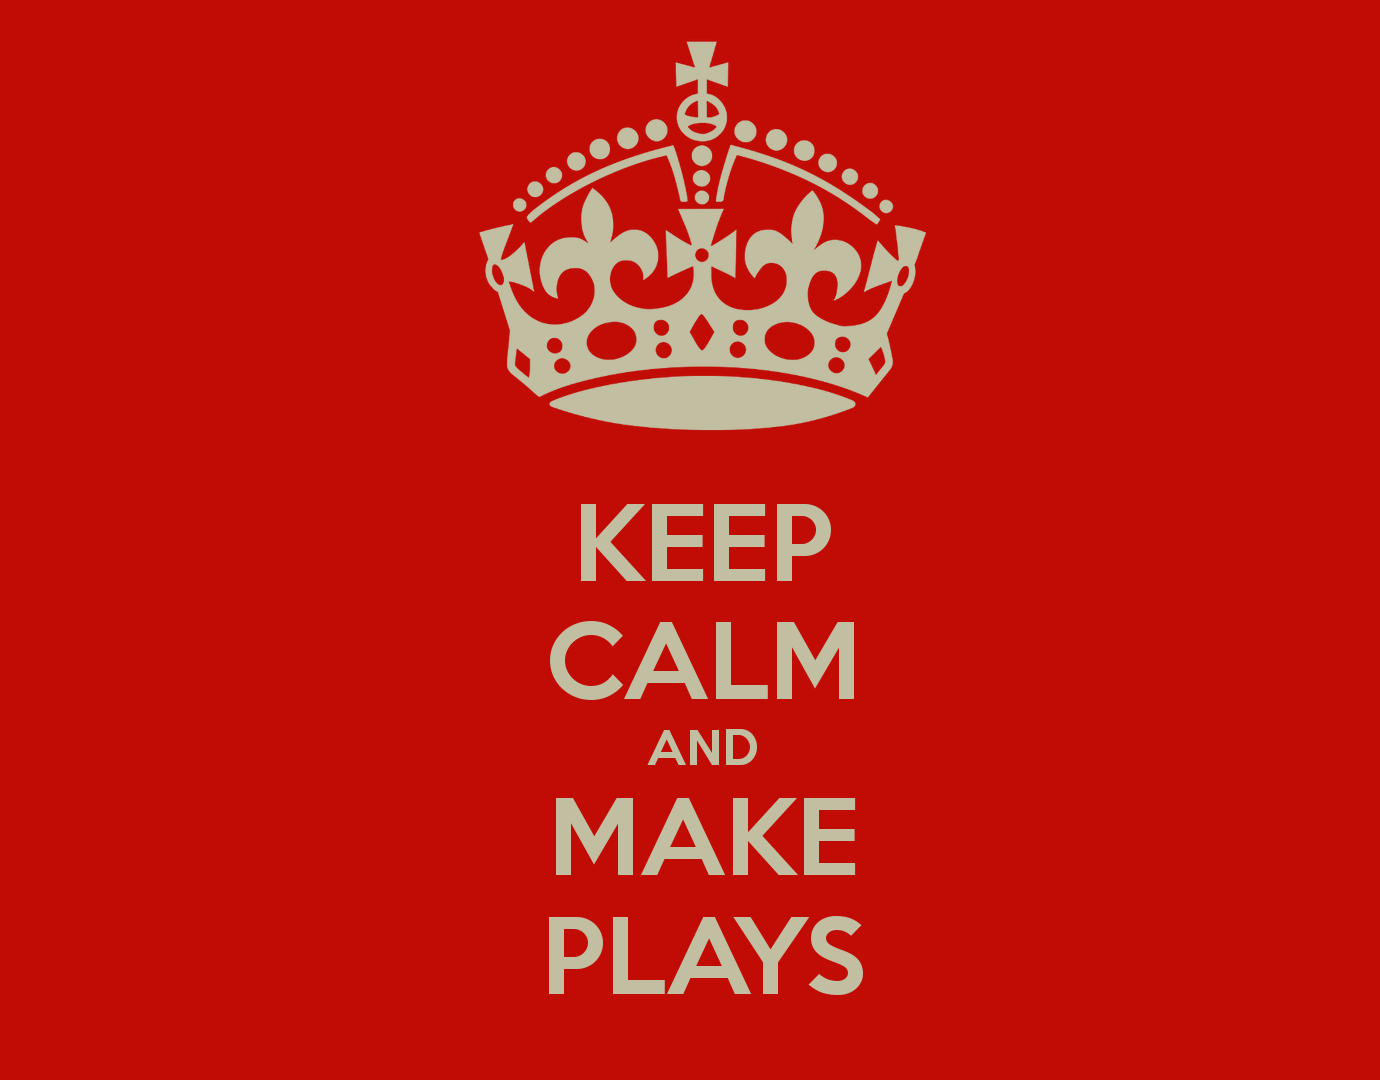 keep-calm-and-make-plays-8-846275-edited.png